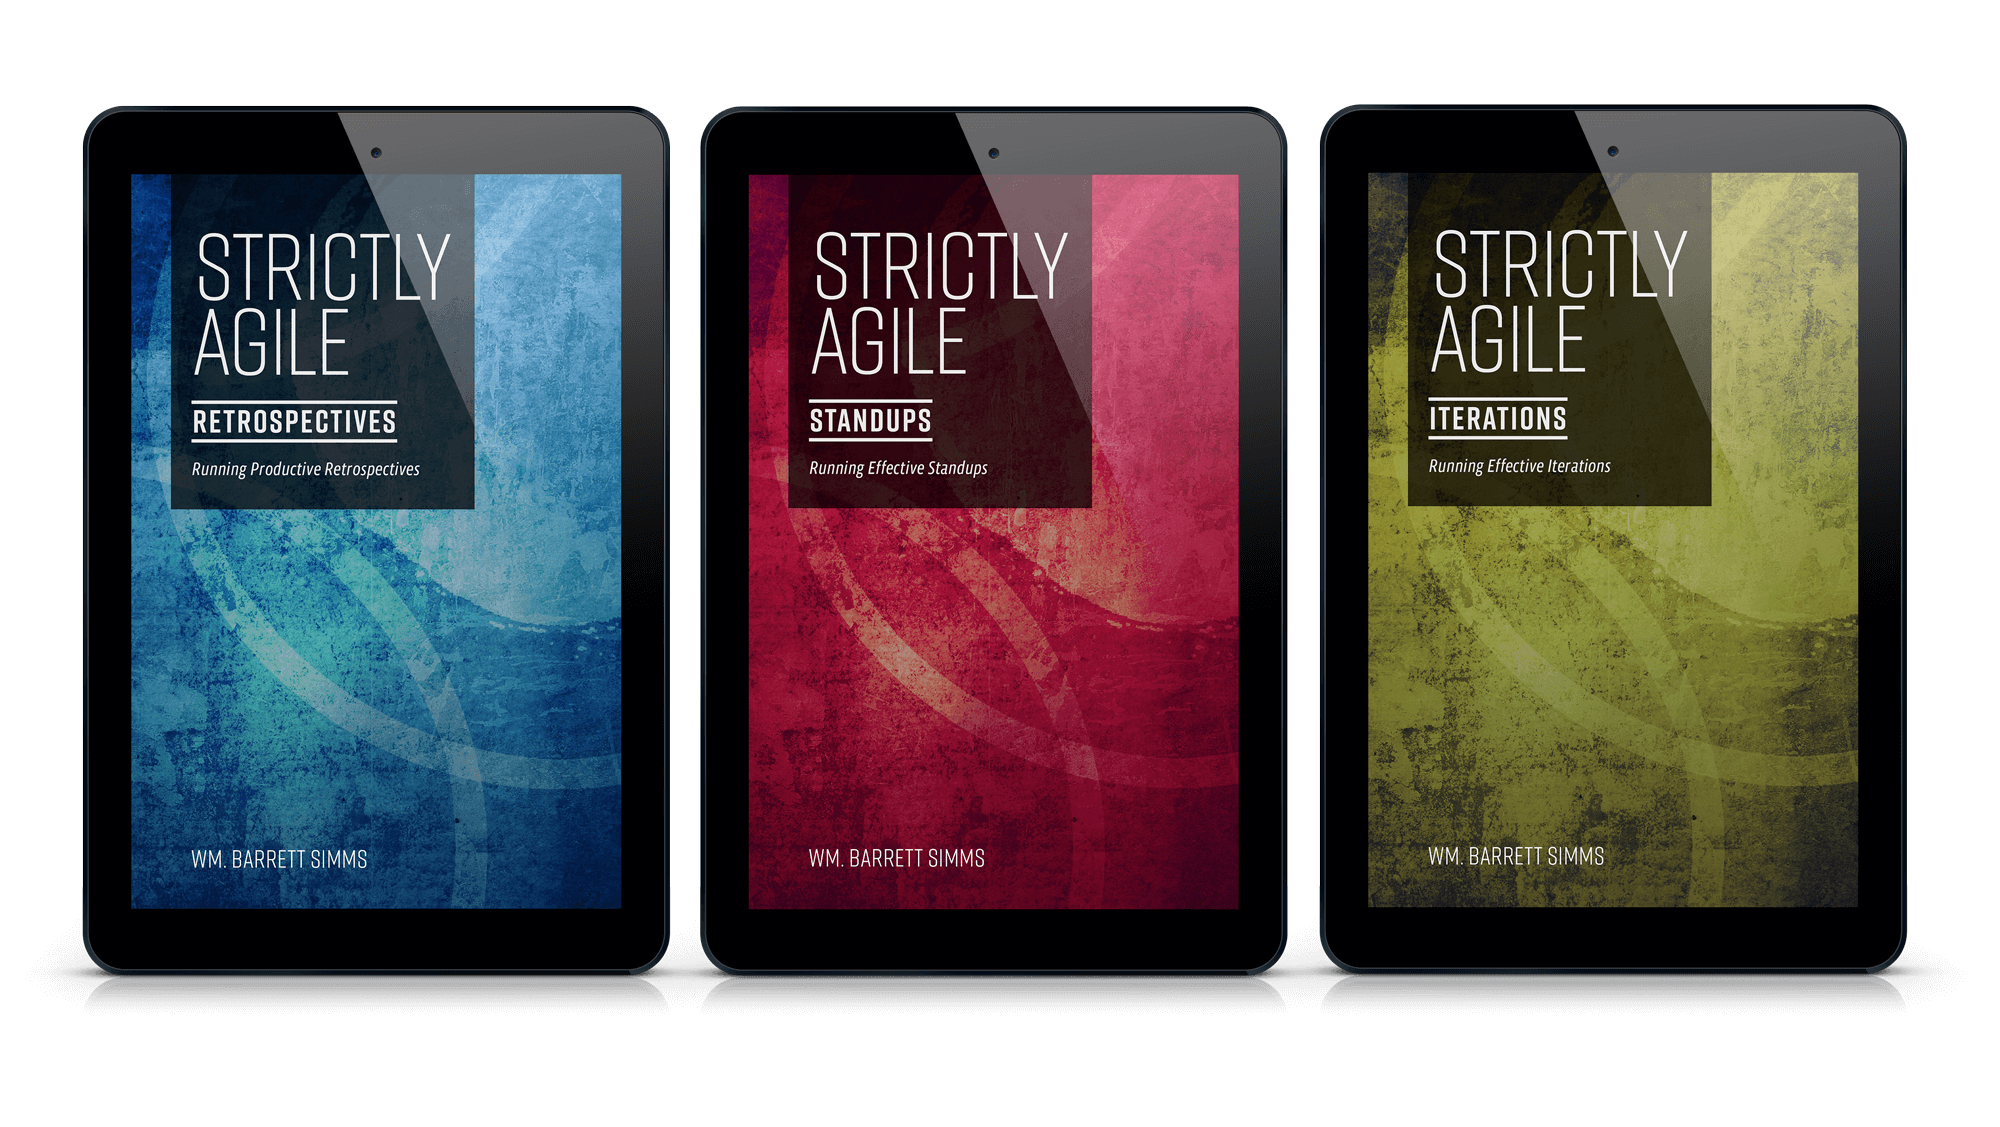 Strictly Agile Book Series